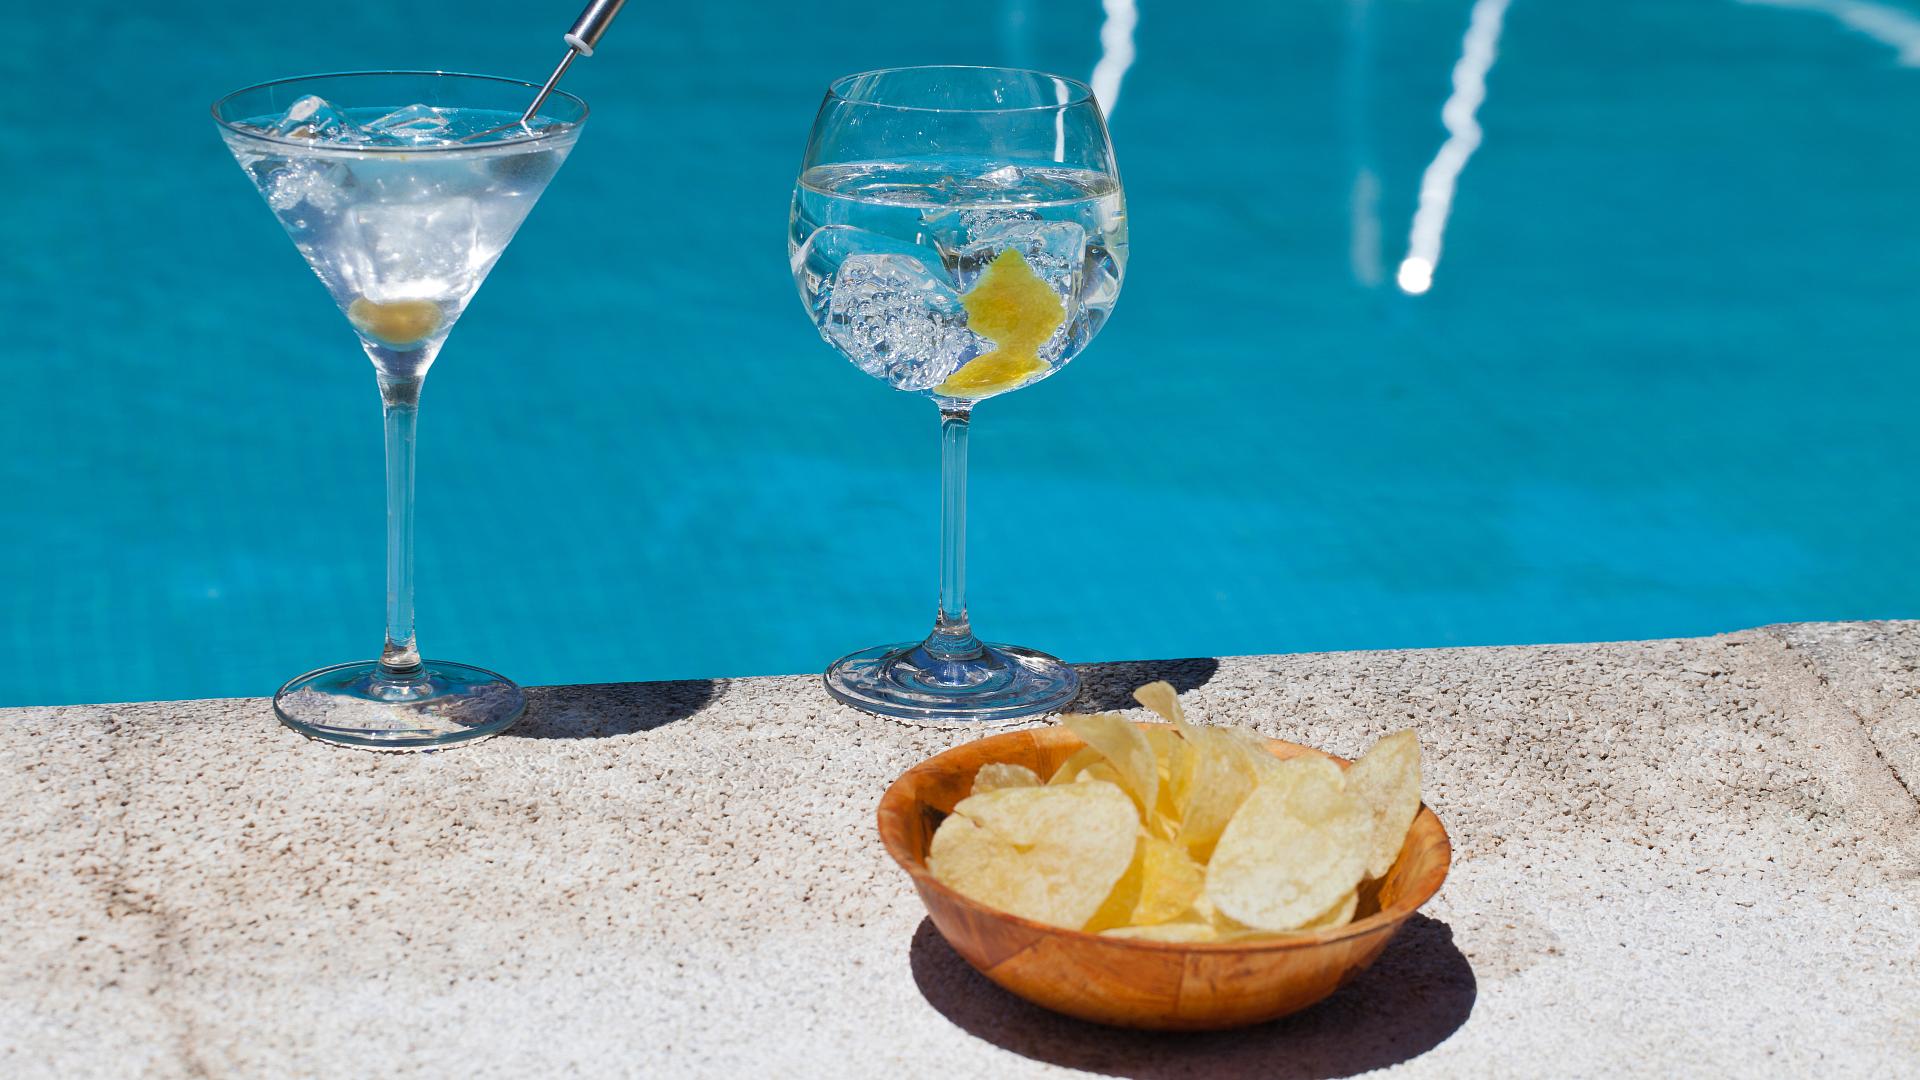 Enjoy a delicious snack by the pool!